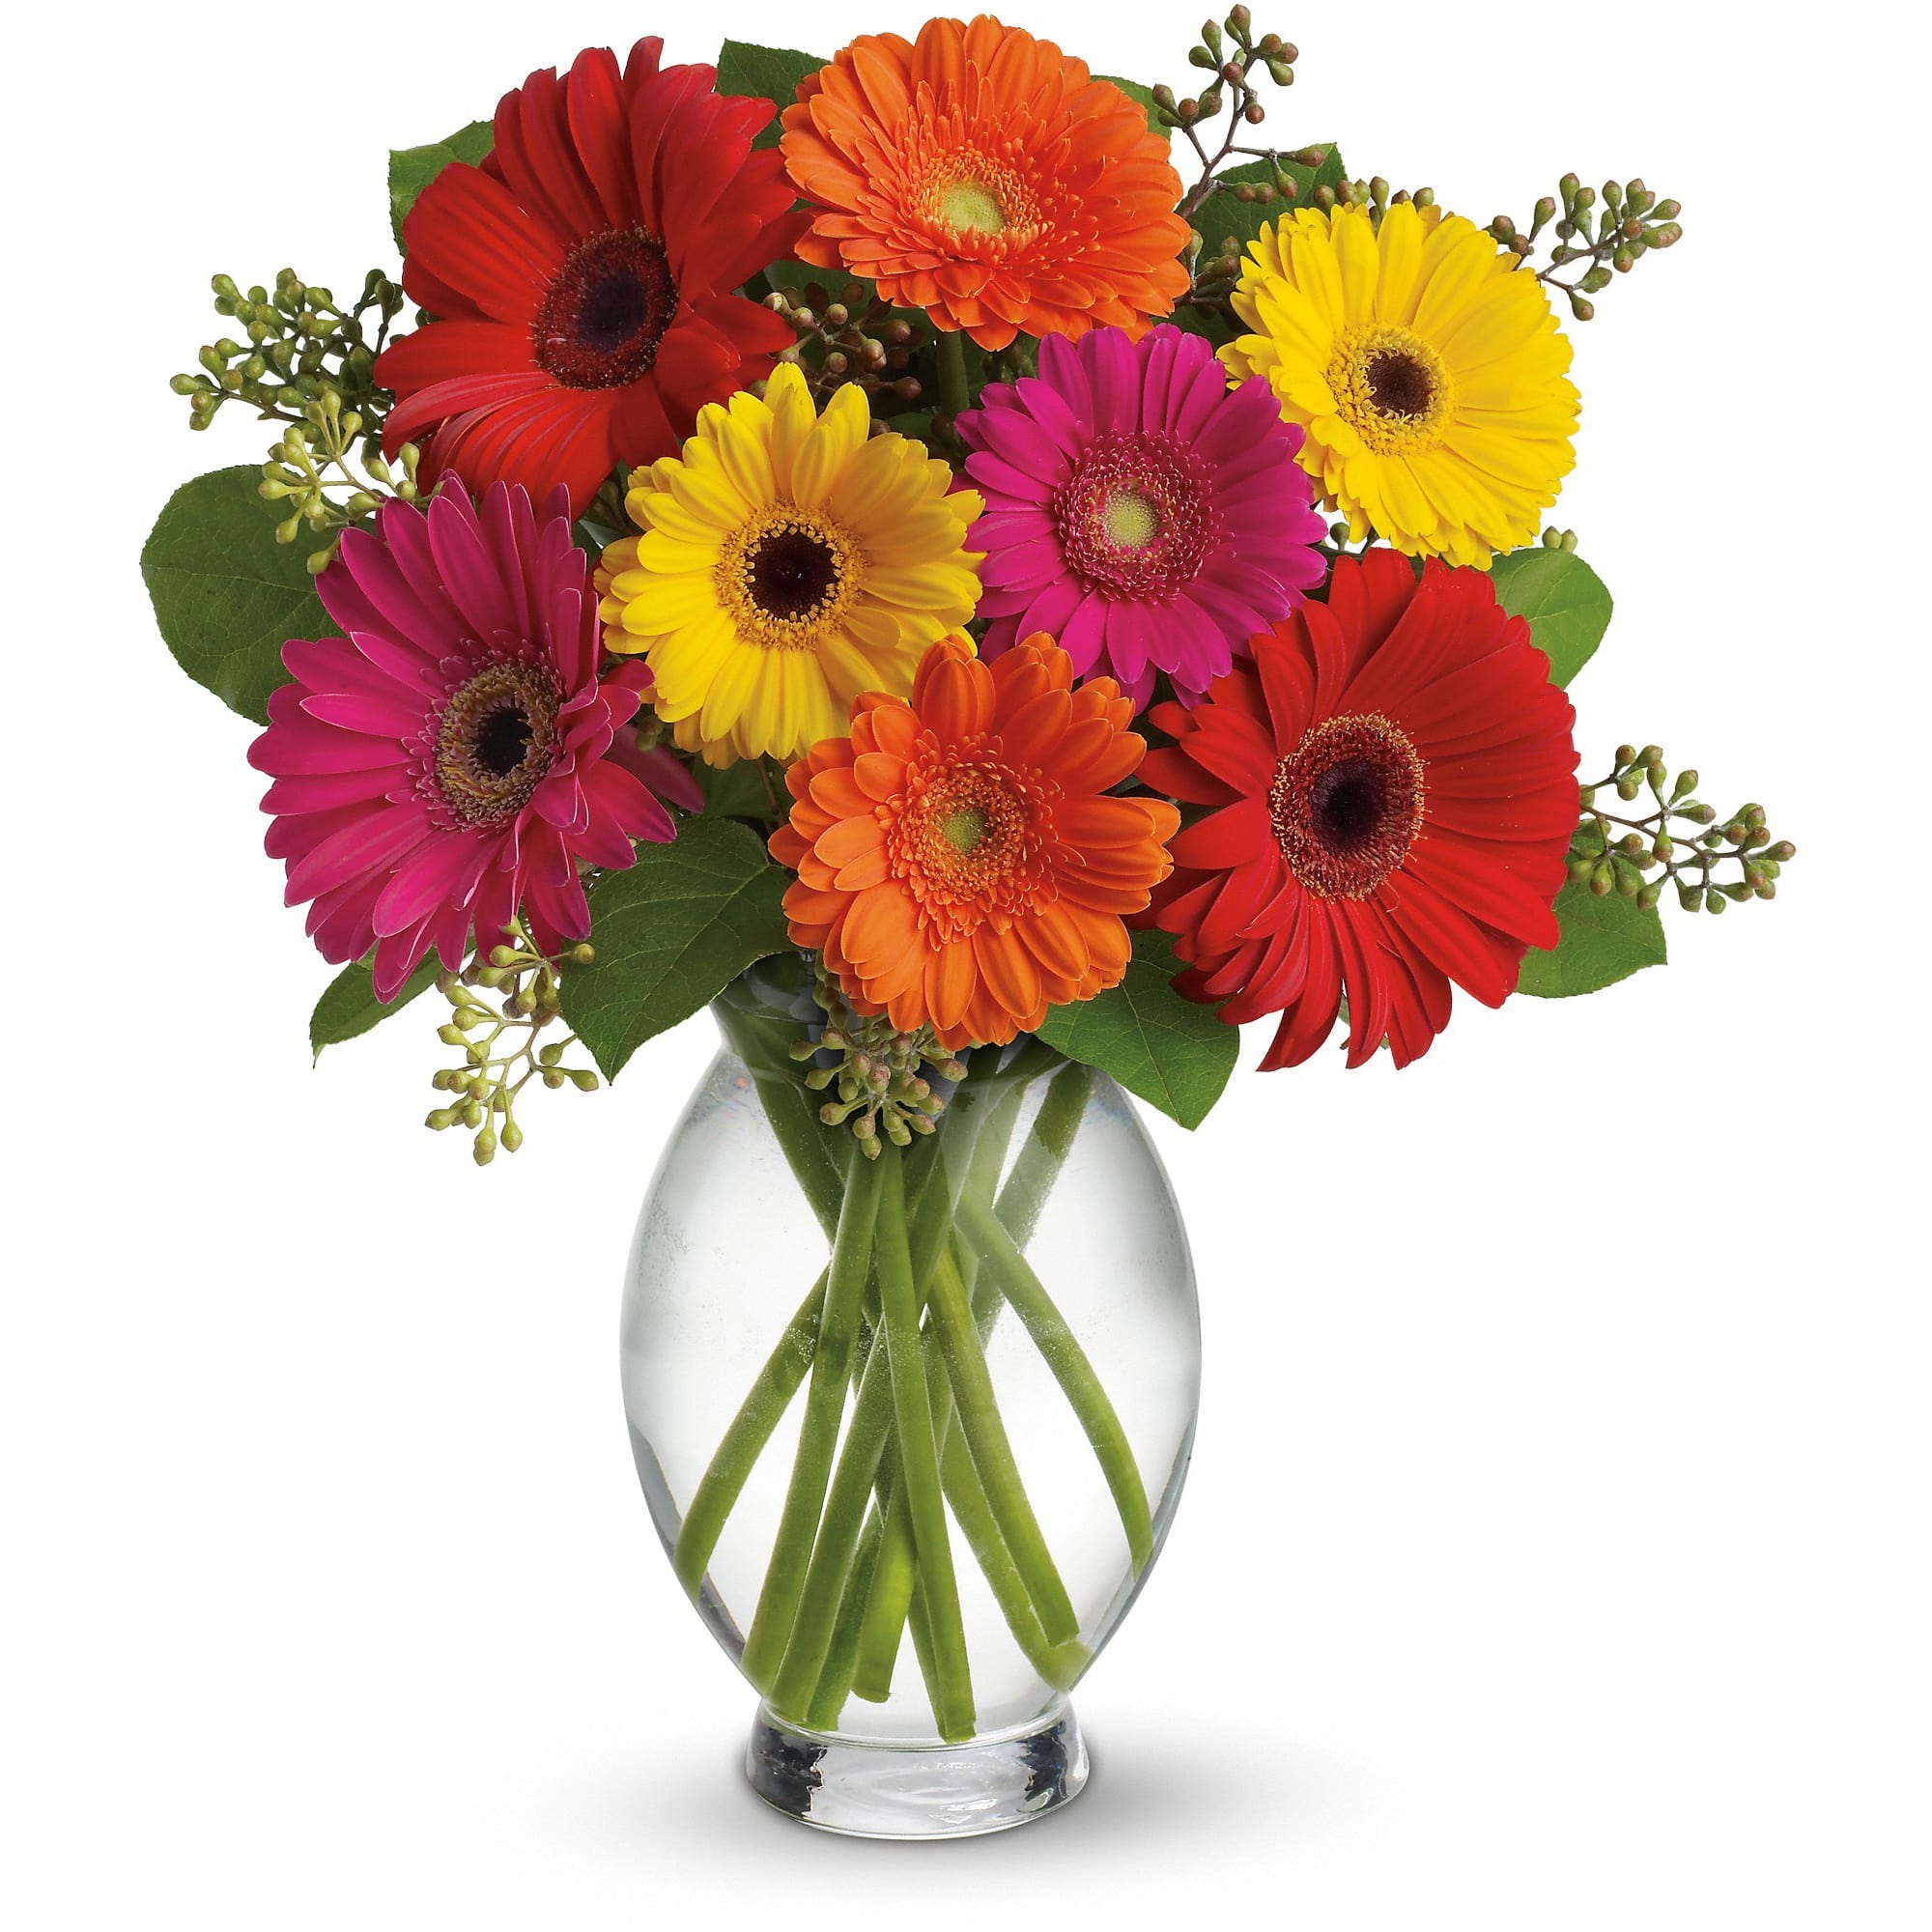 Teleflora's Gerbera Brights - Sending this bouquet just might be your brightest idea of the summer! Gerberas are so full of color, charisma and character, and this arrangement showcases their glory. 